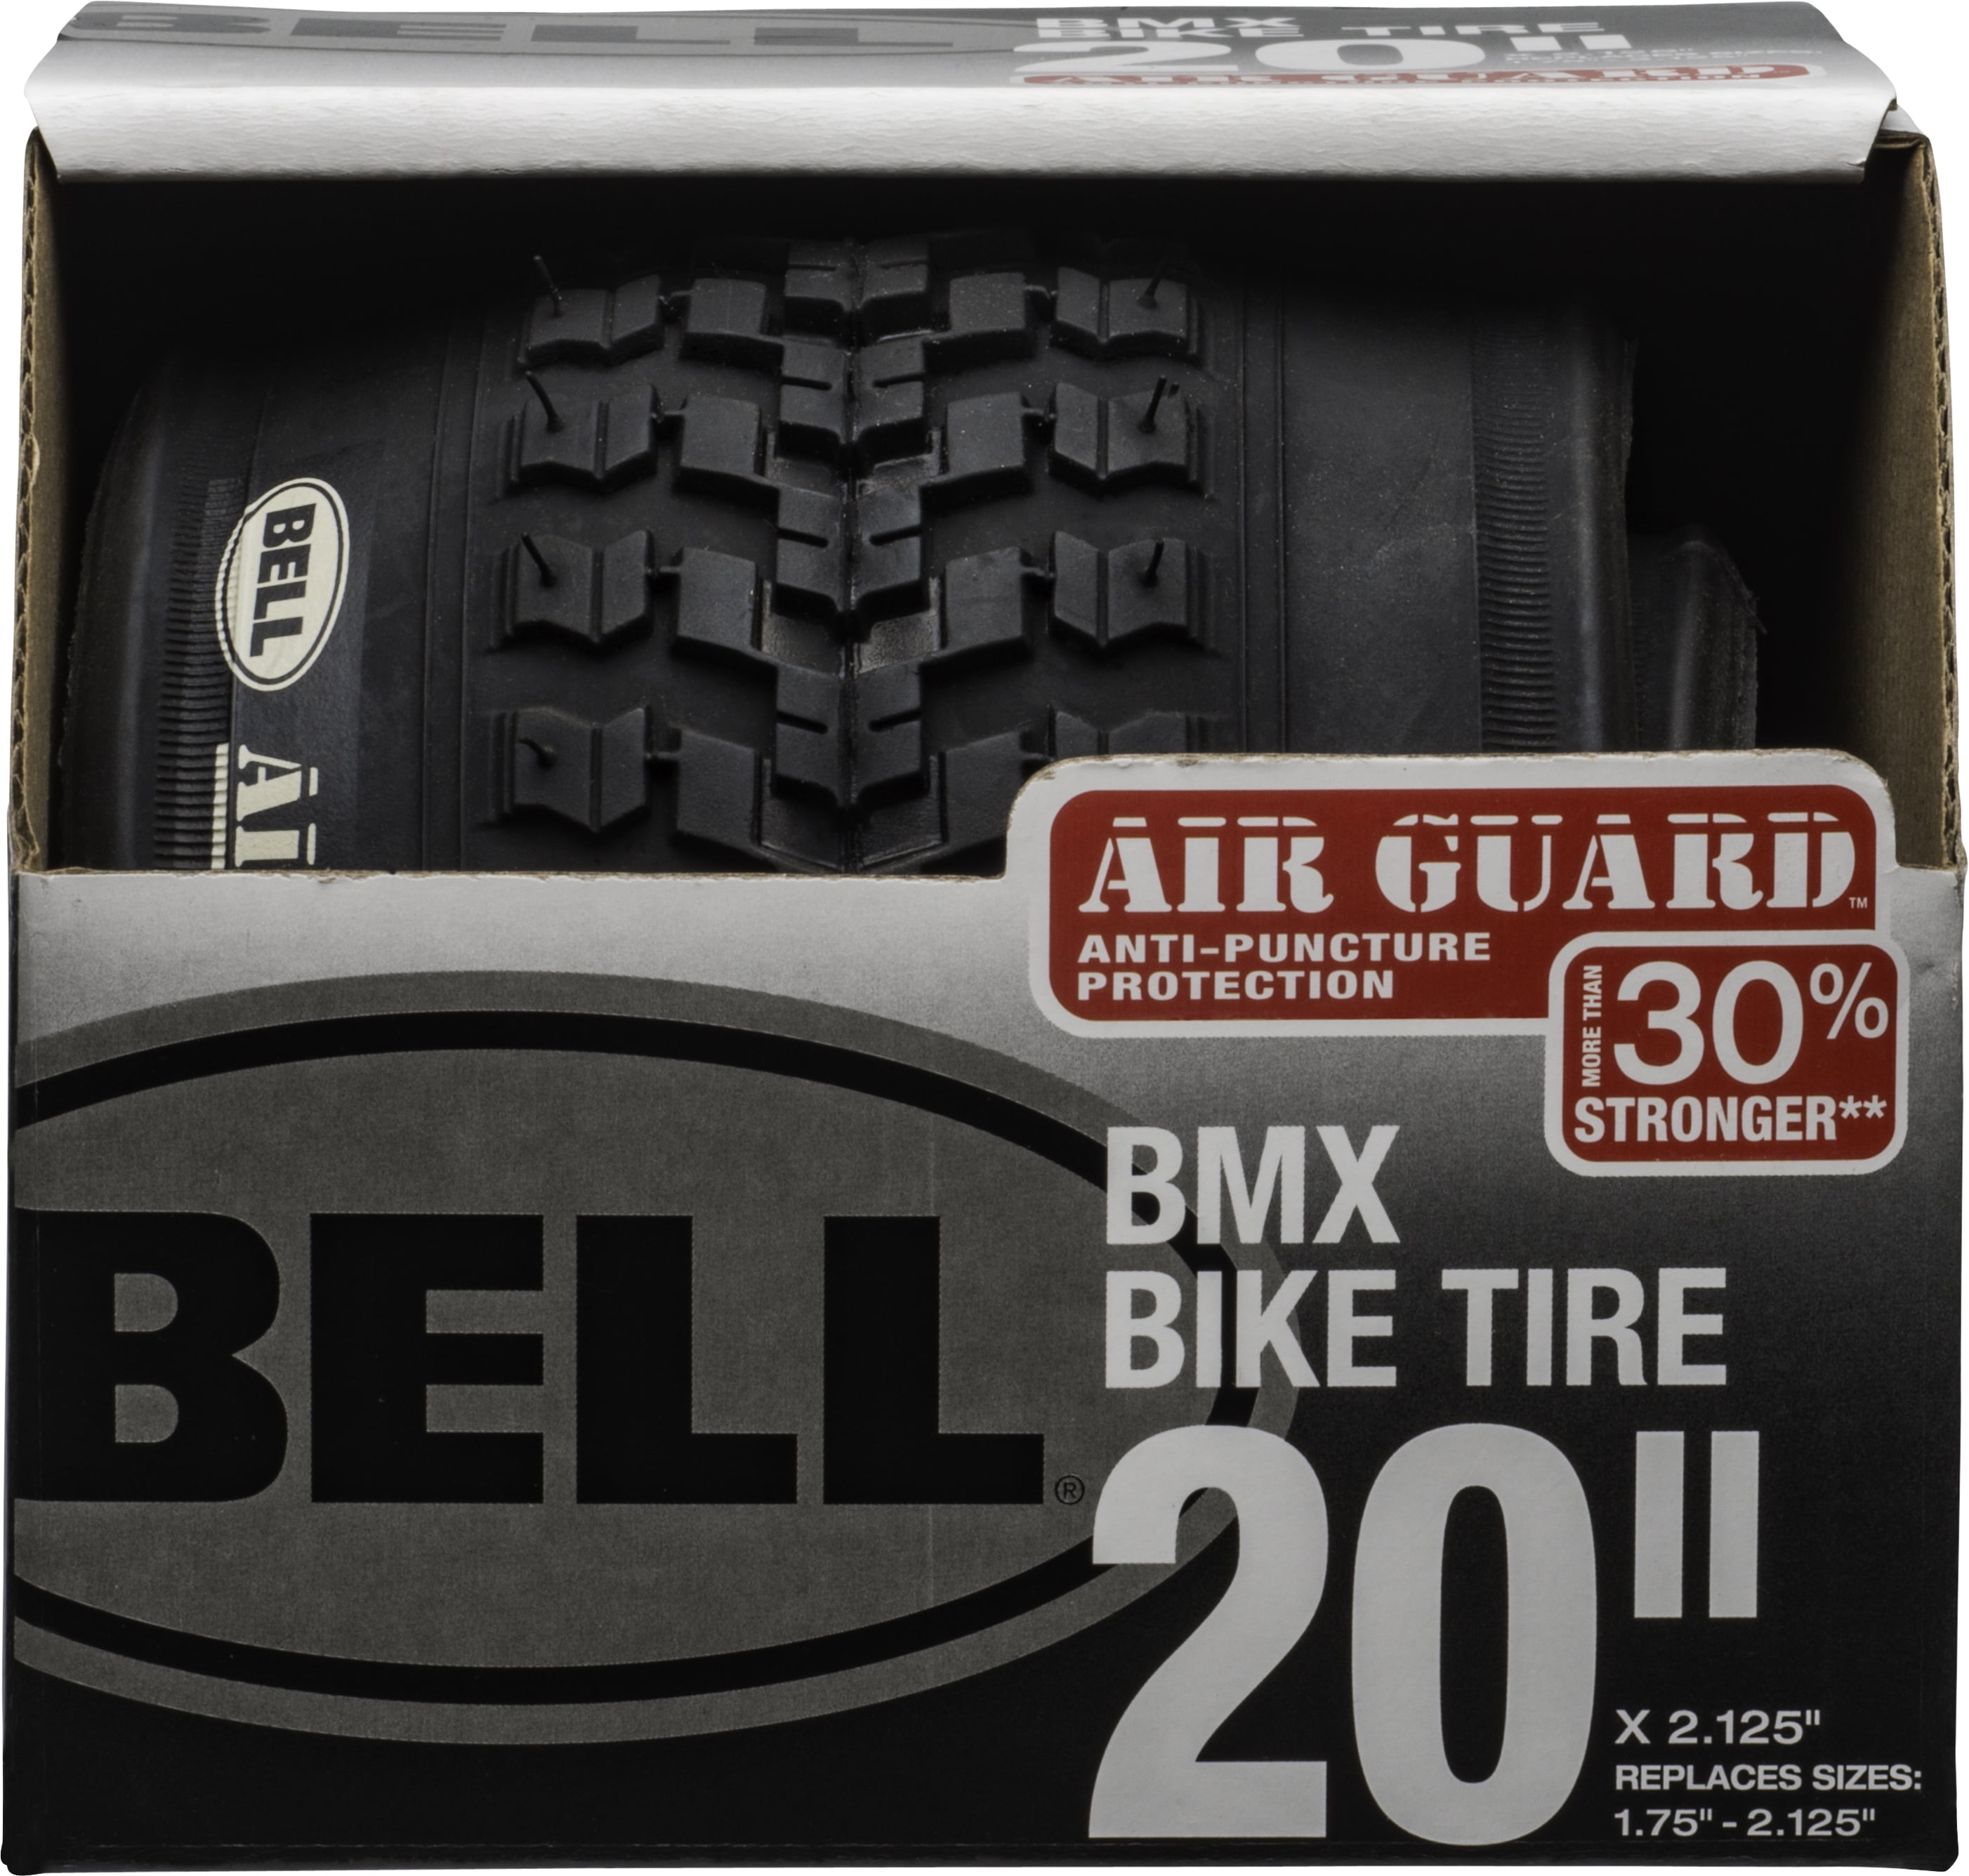 Details about   NIB BELL MOUNTAIN BIKE TIRE 20" TIRE~AIR GUARD ANTI-PUNCTURE PROTECTION~BLACK 